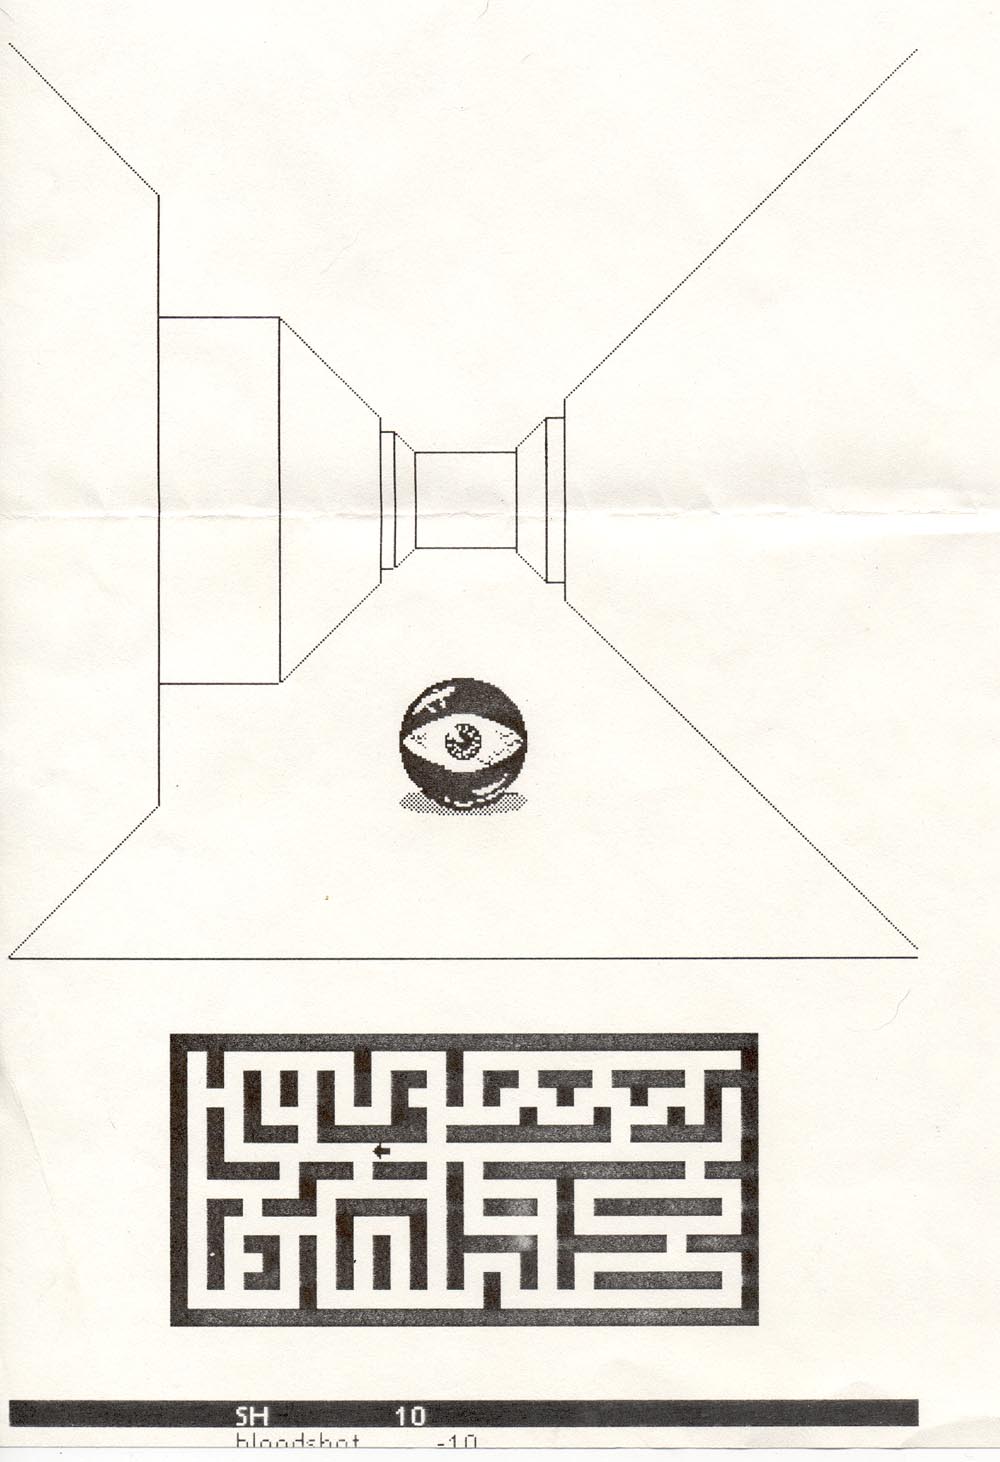 a large demonic eyeball sits in a hallway rendered with one-point perspective. The bottom half of the page has a black and white plan-view of a maze with a small arrow in a hallway indicating the position of the player.